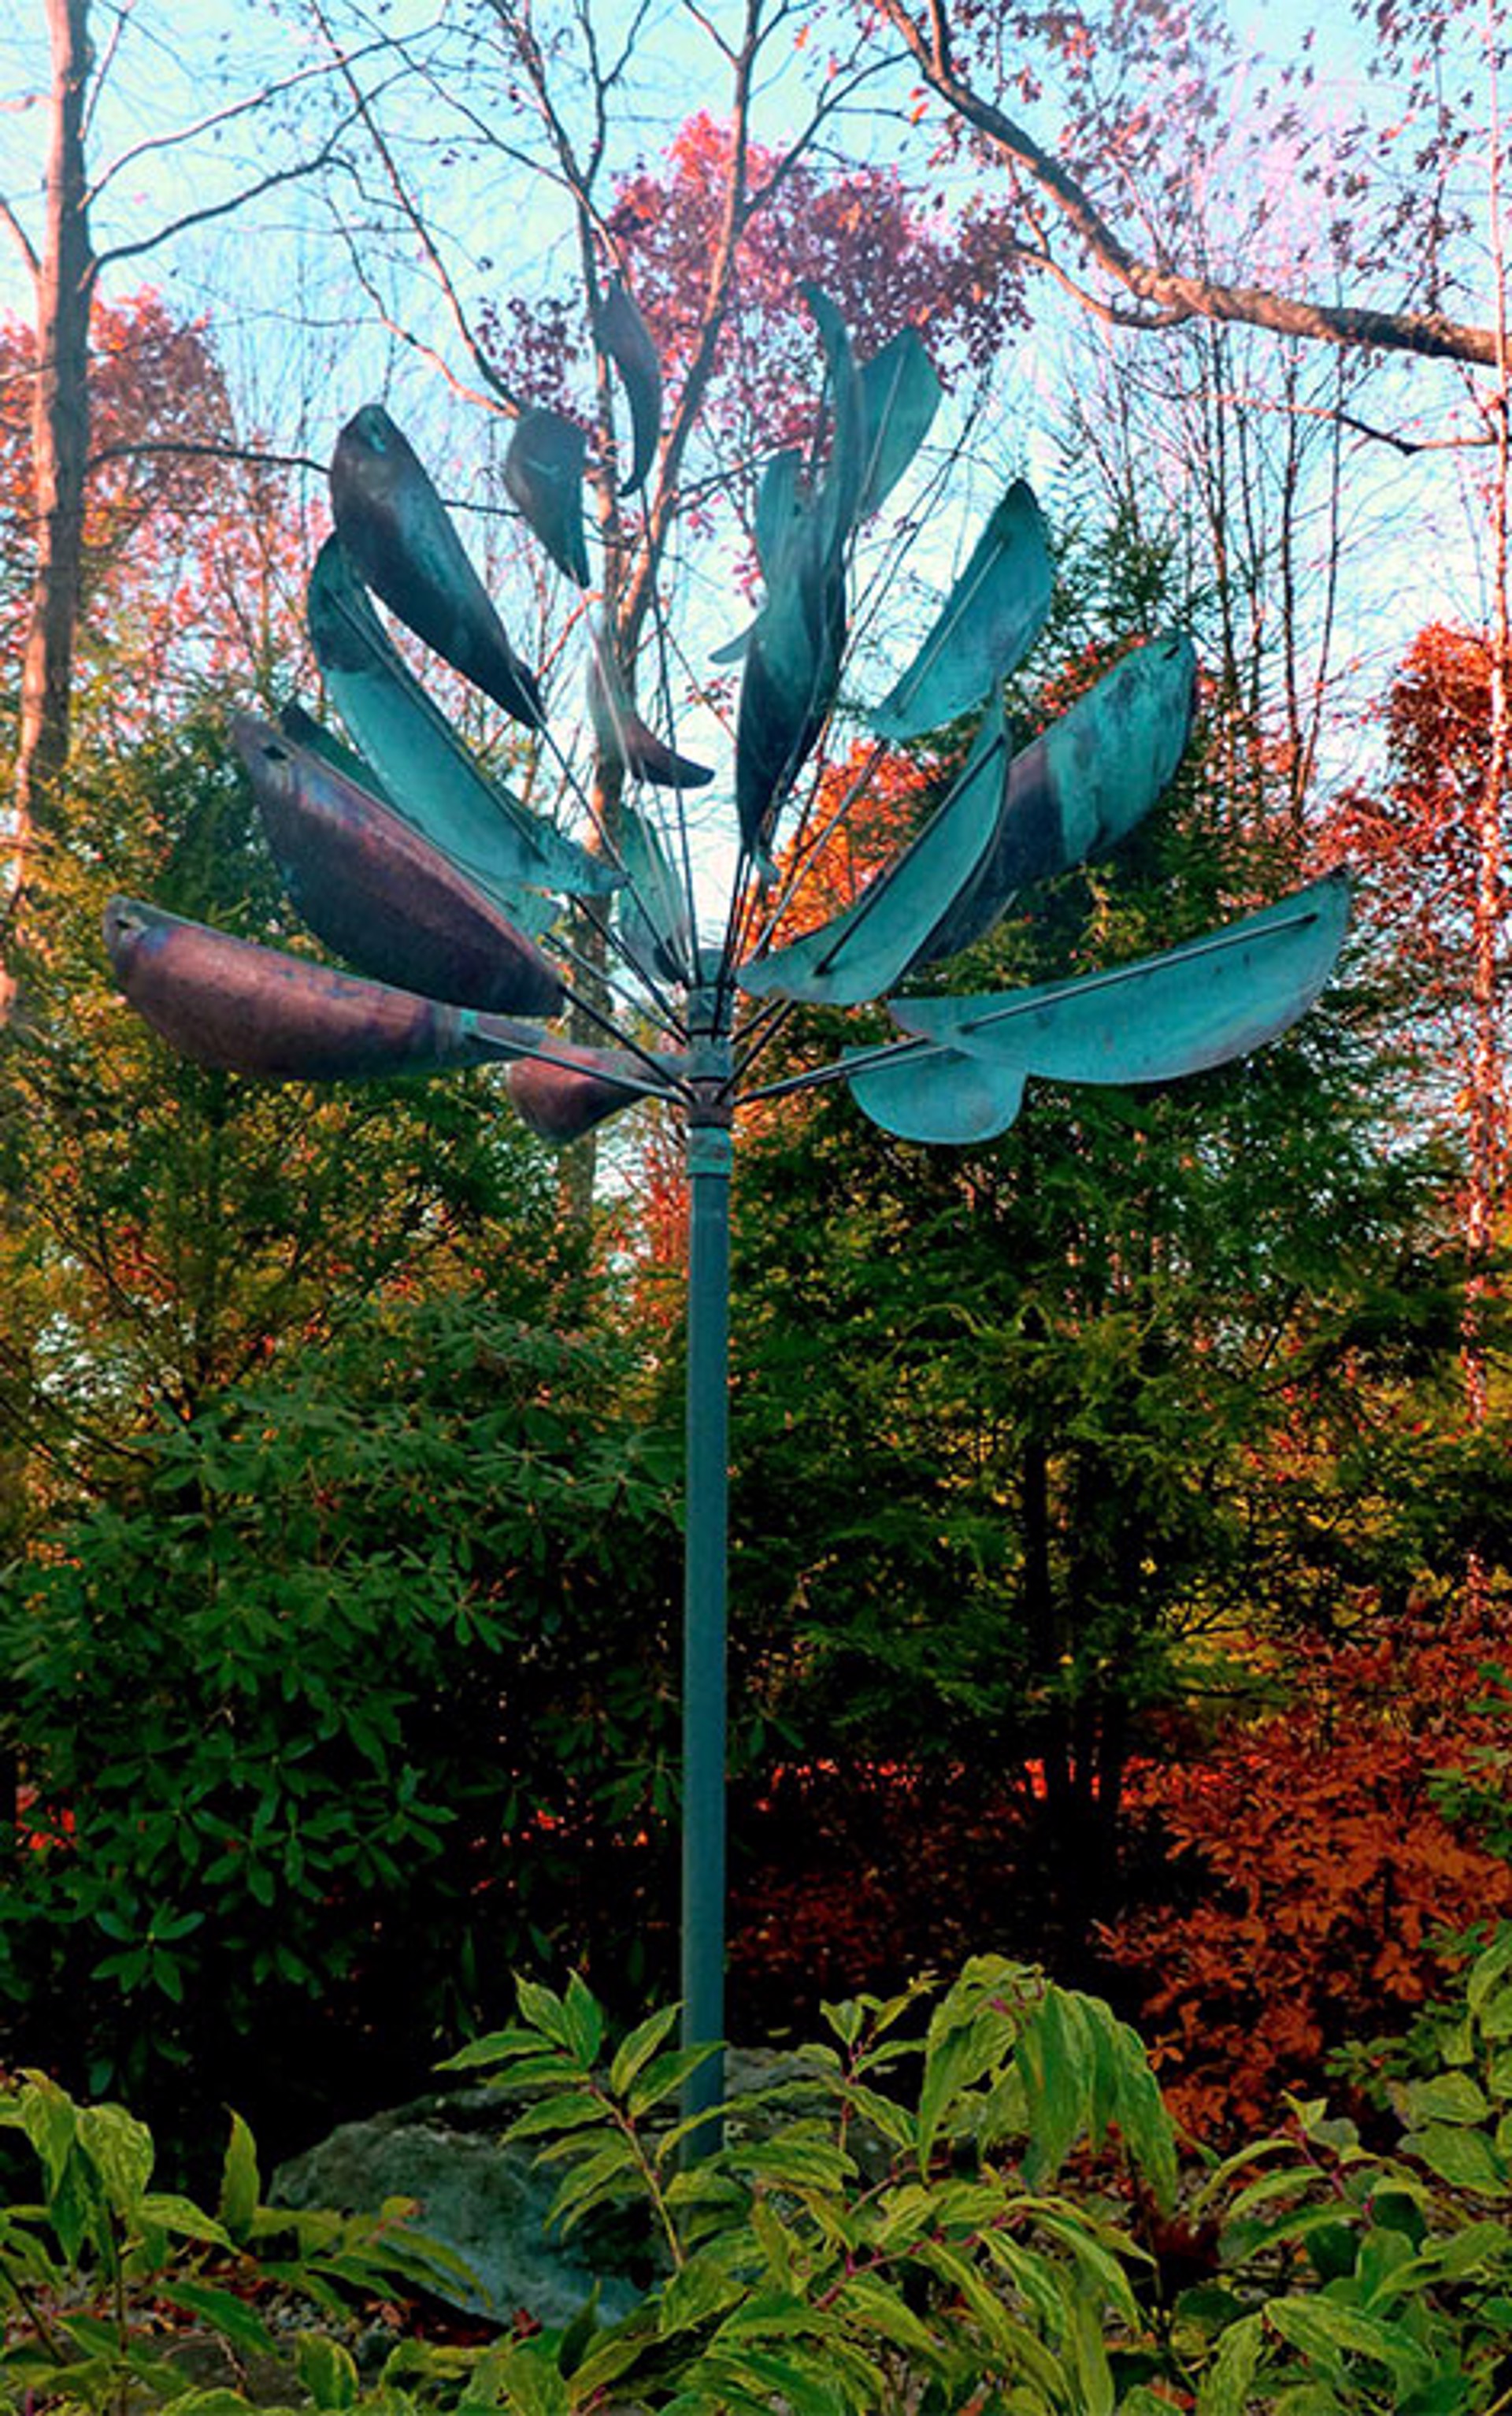 Agave by Lyman Whitaker